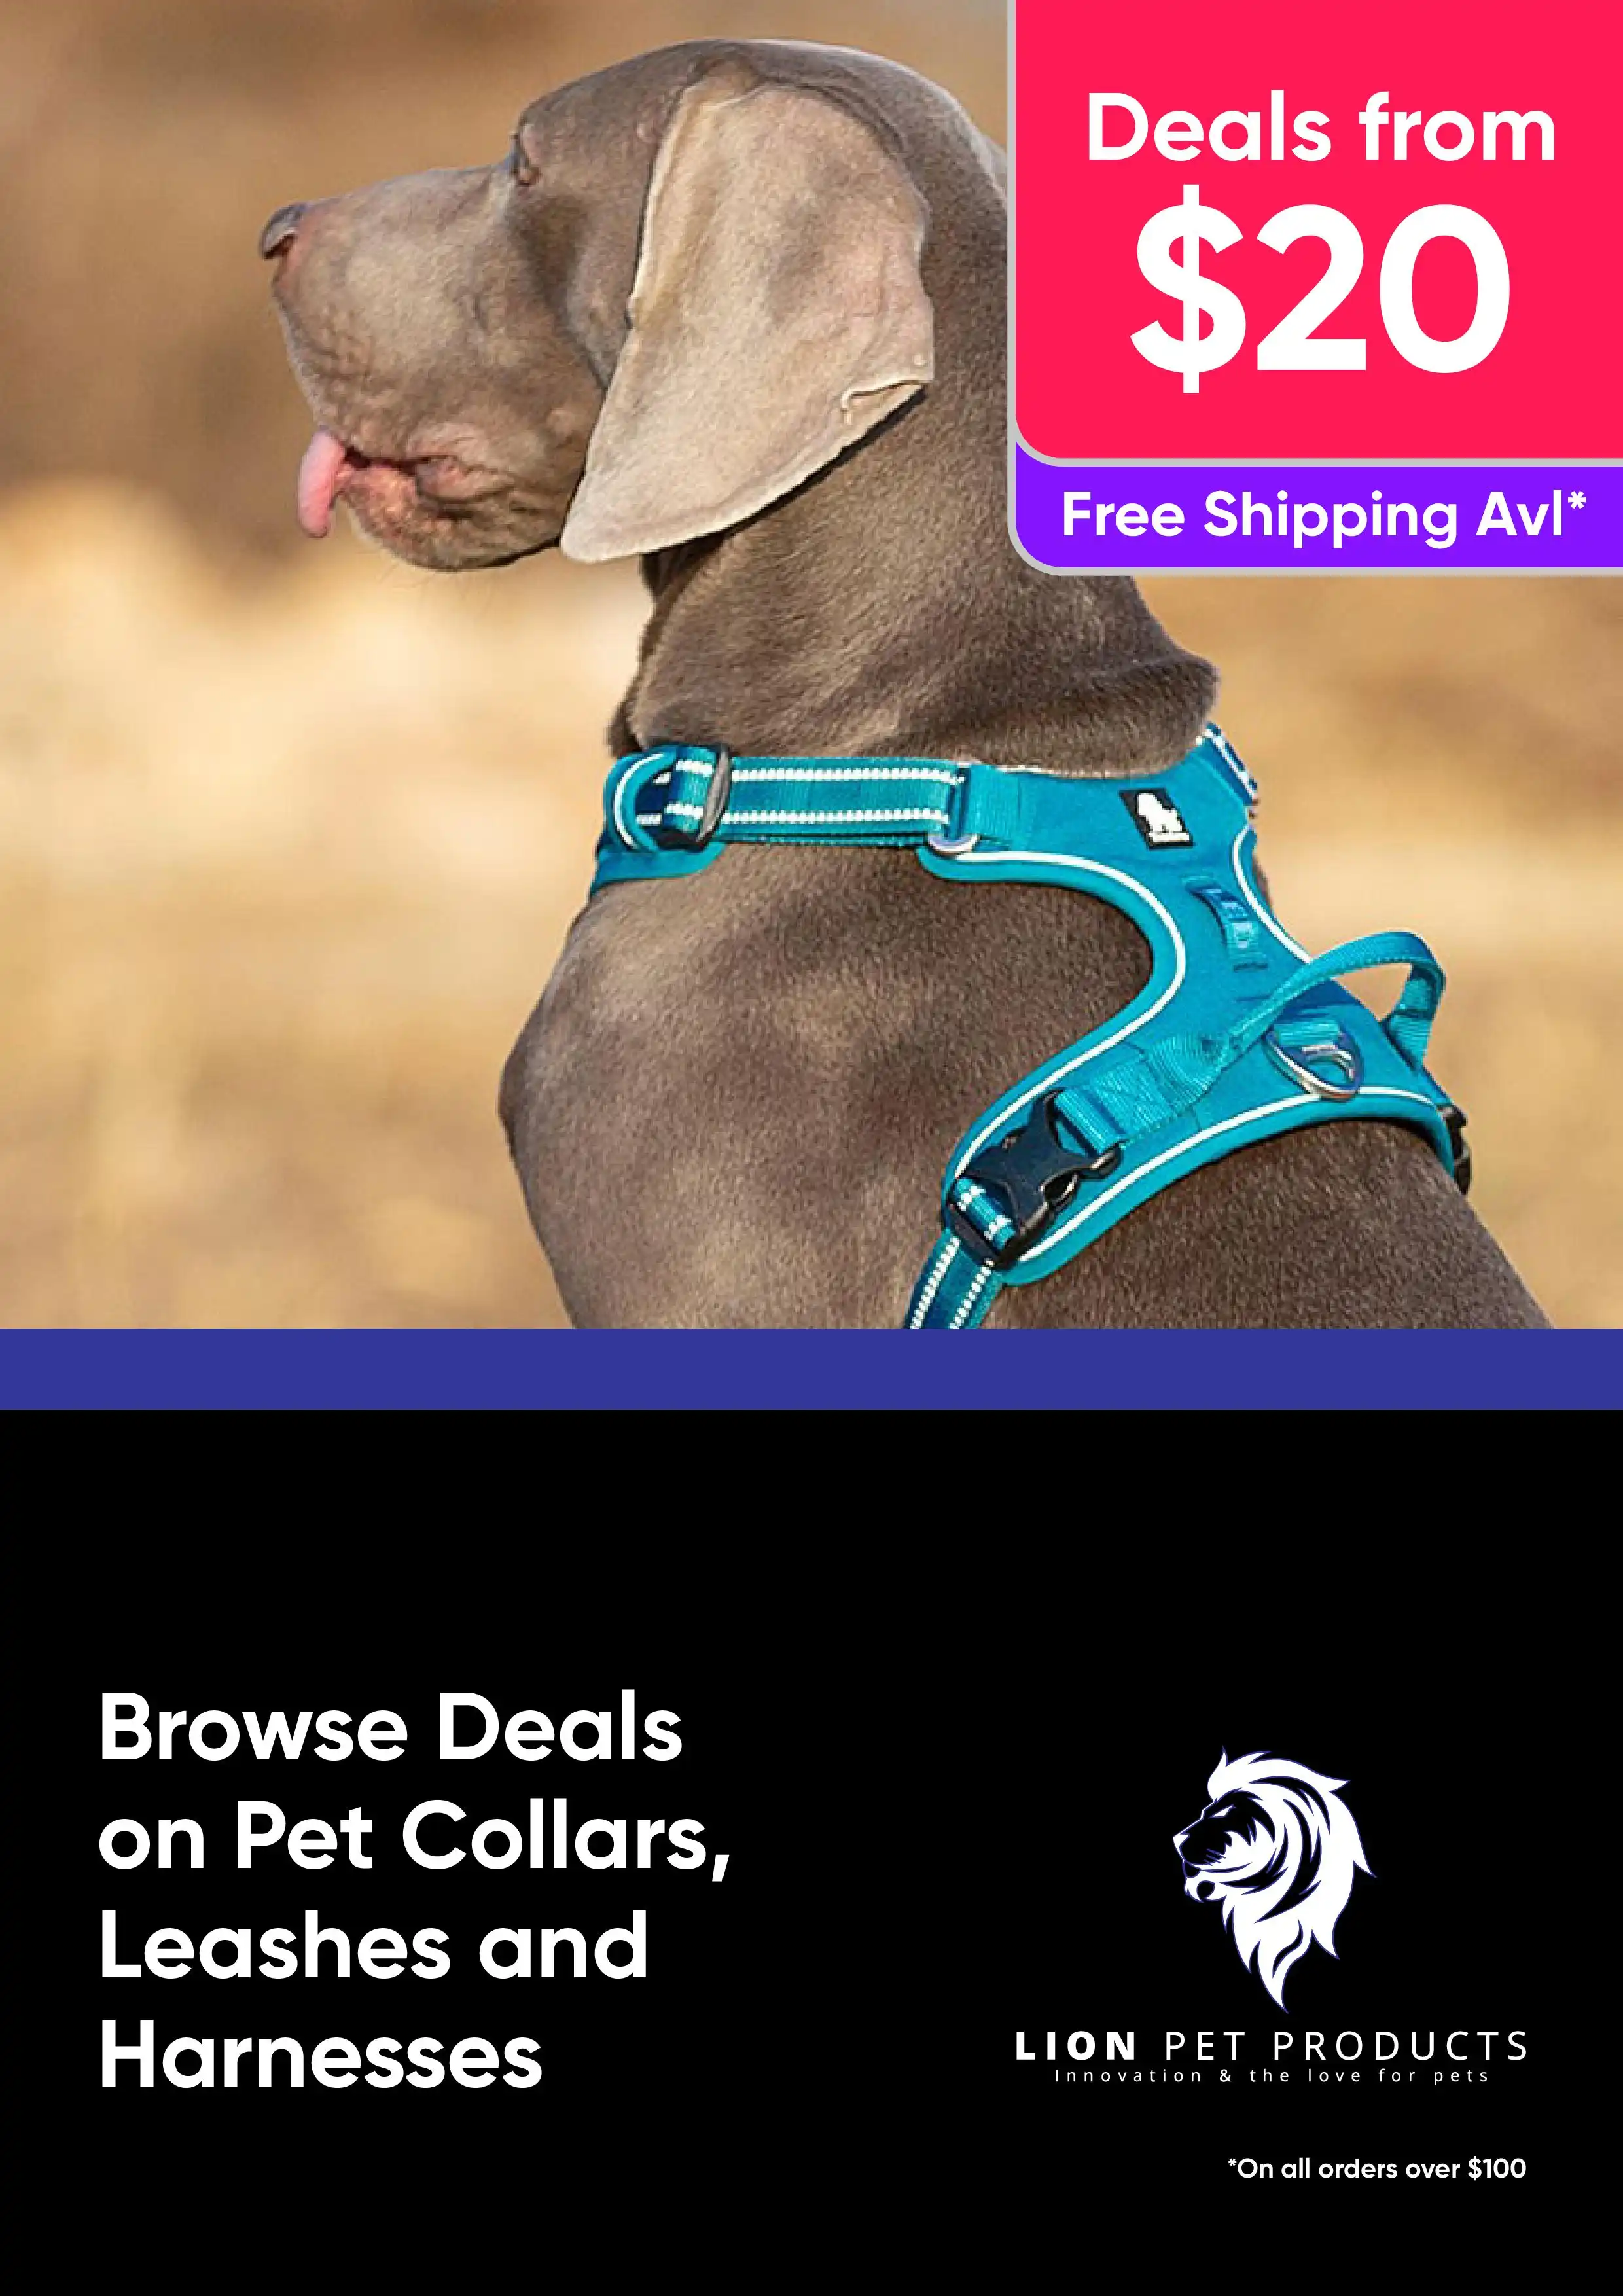 Browse Deals on a Big Range of Pet Collars, Leashes and Harnesses